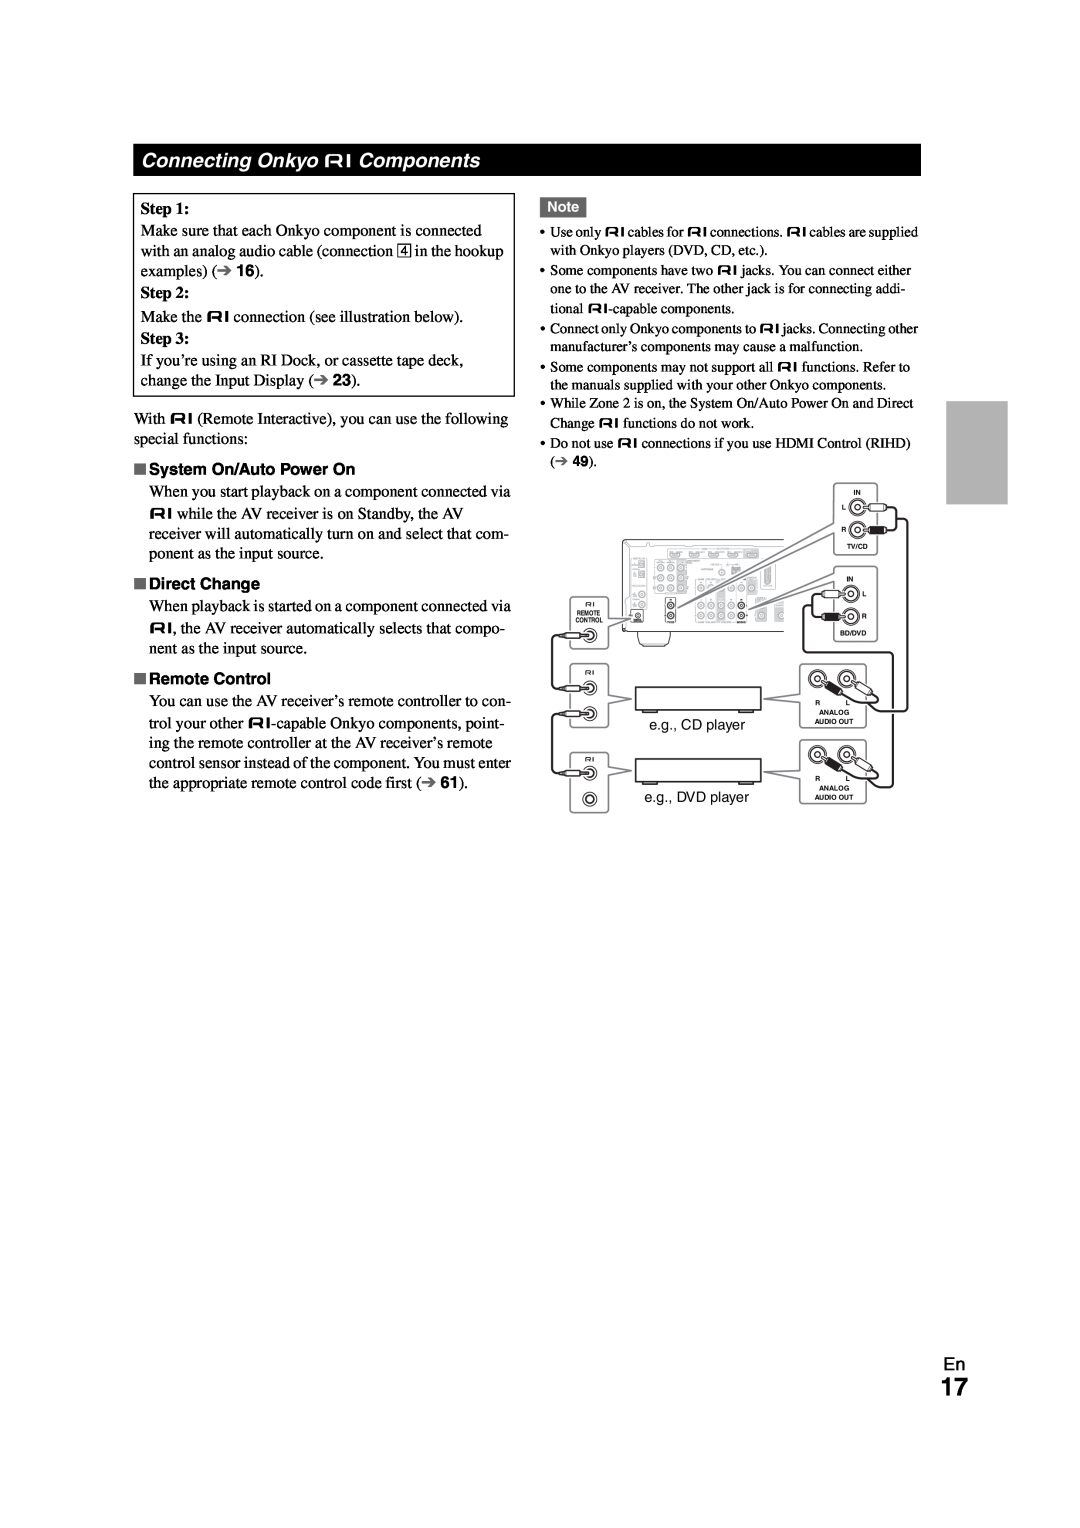 Onkyo HT-R980 instruction manual Connecting Onkyo uComponents, System On/Auto Power On, Direct Change, Remote Control 